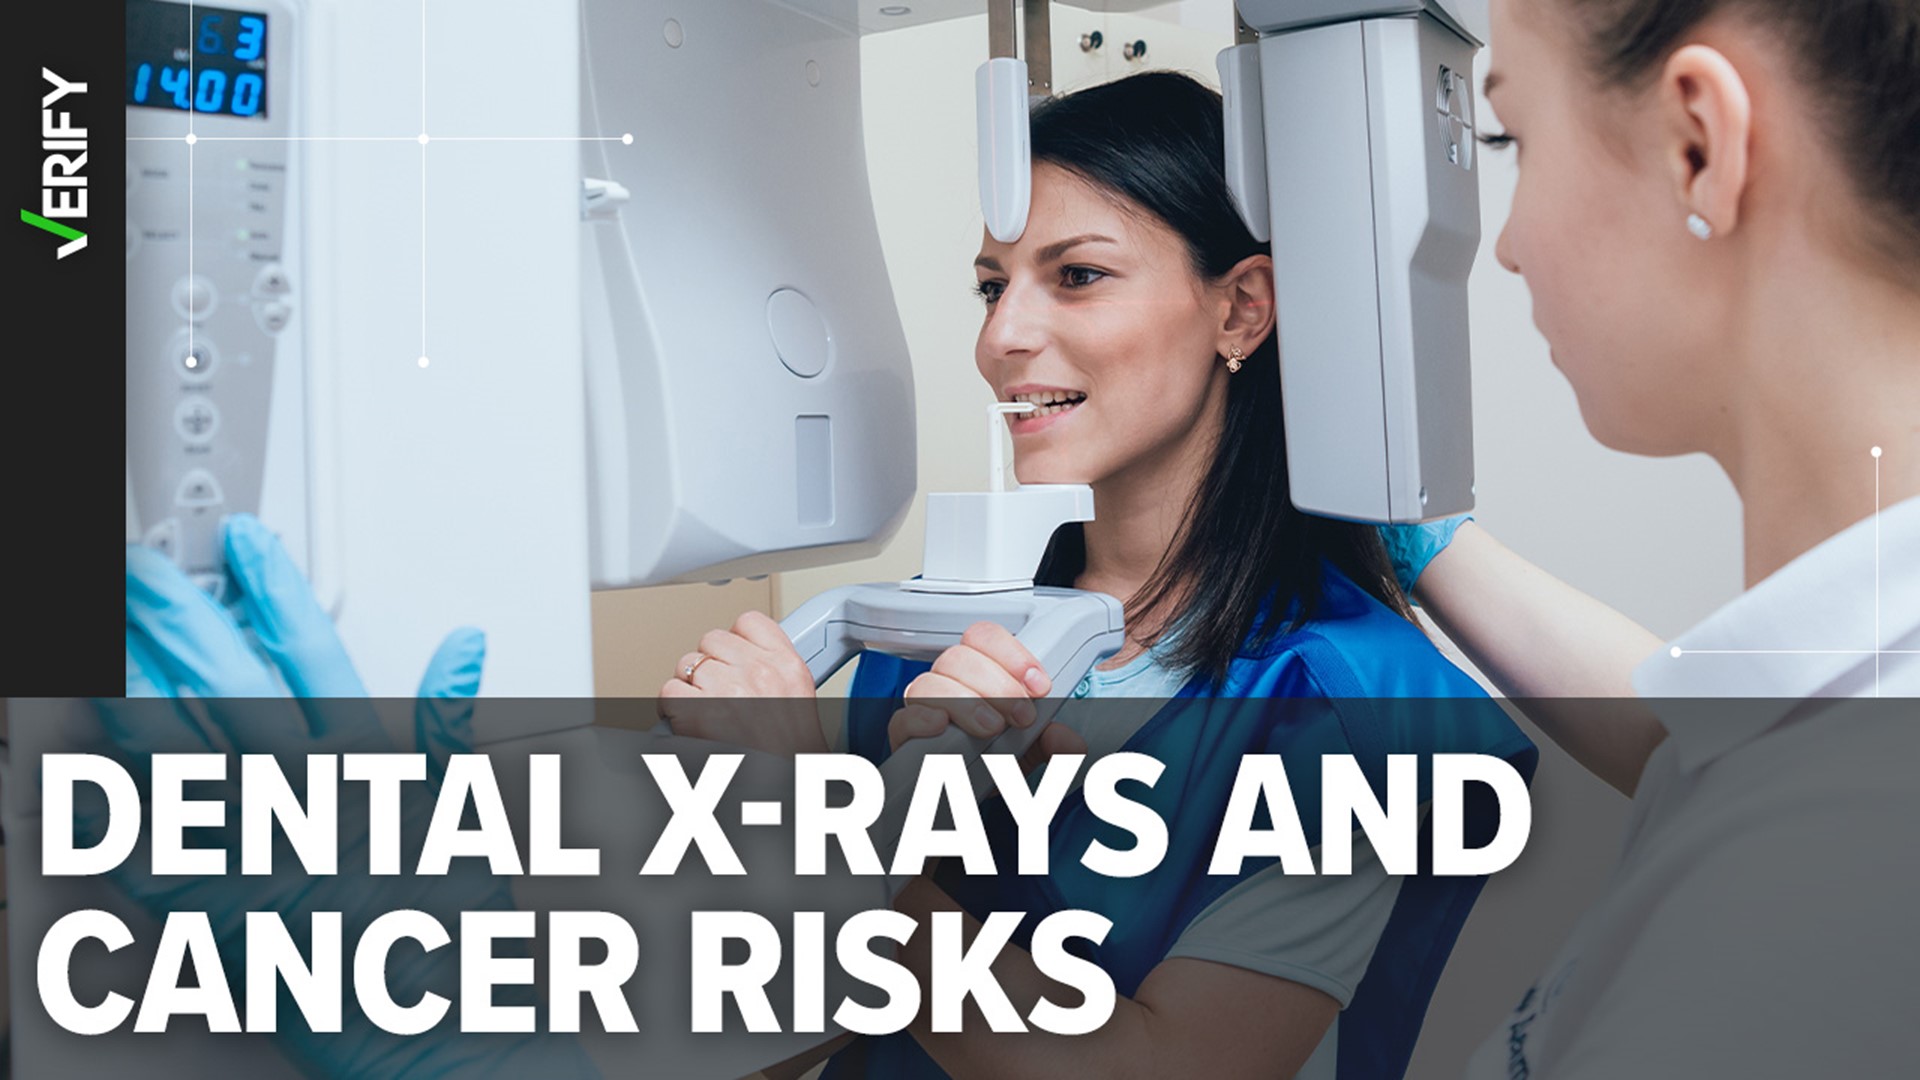 All forms of radiation exposure carry some cancer risk. For a single dental X-ray, that risk is low.